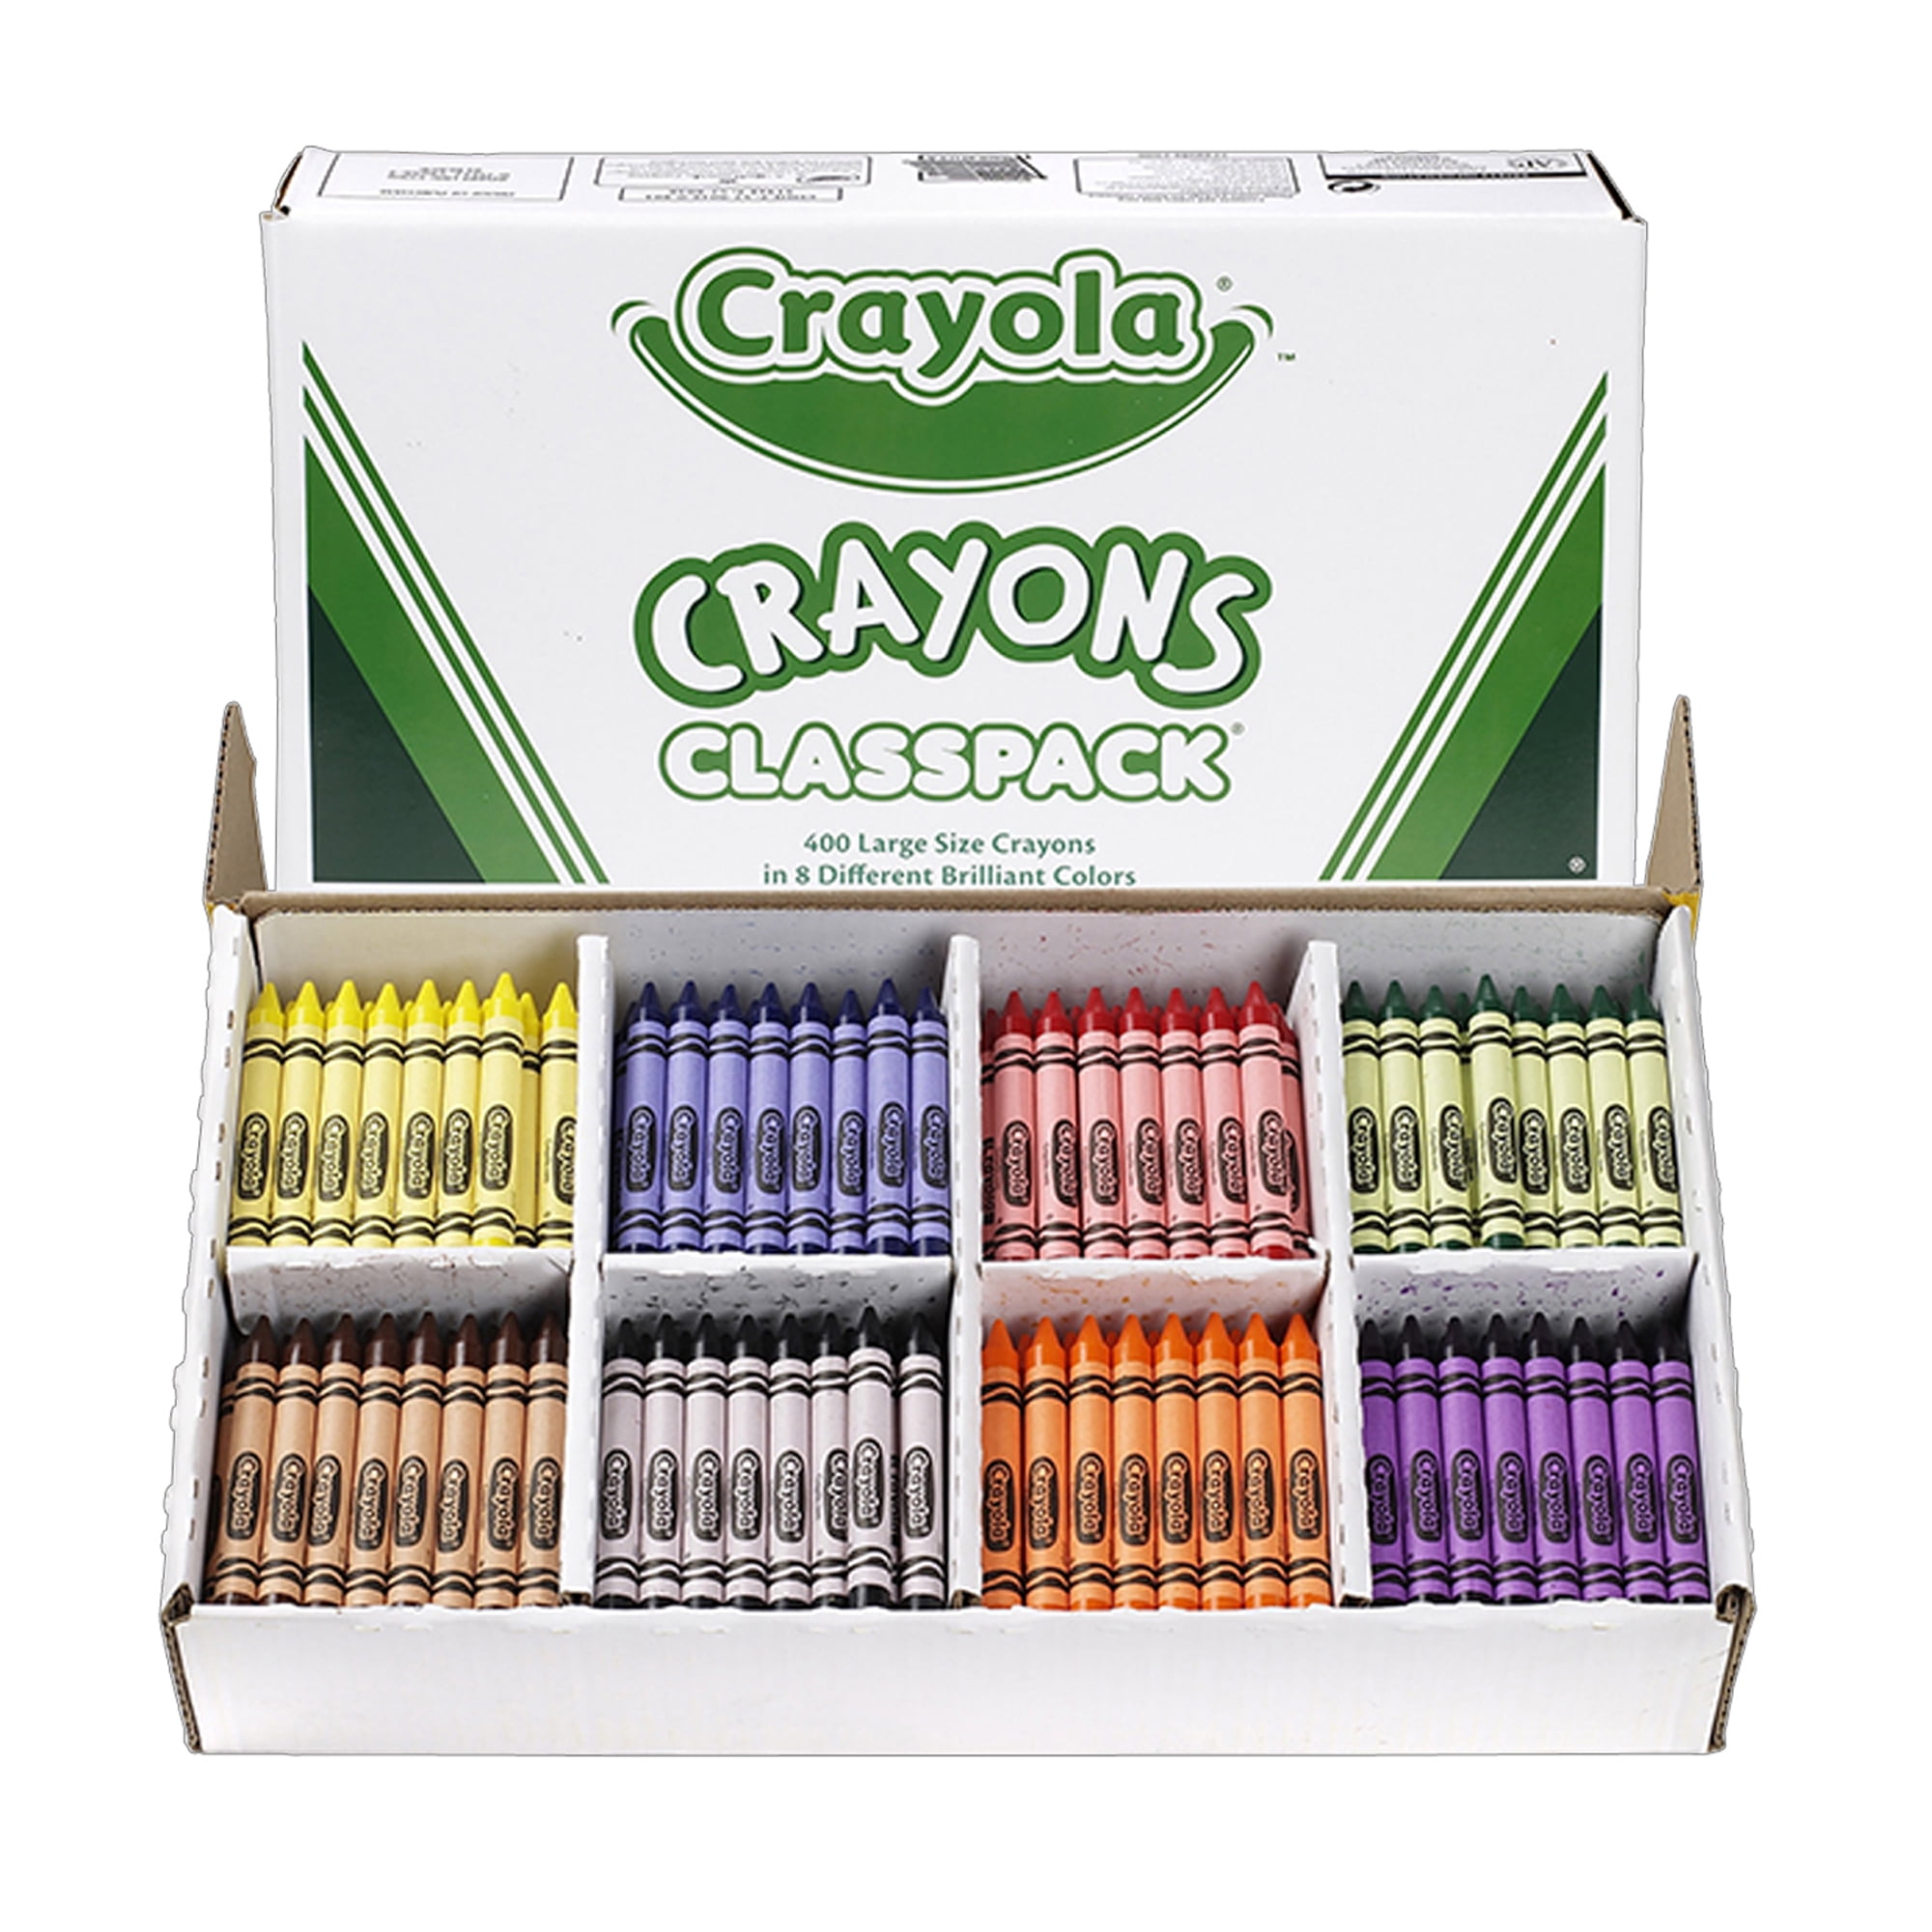 Crayola Crayon Classpack, Large Size, Pack Of 400